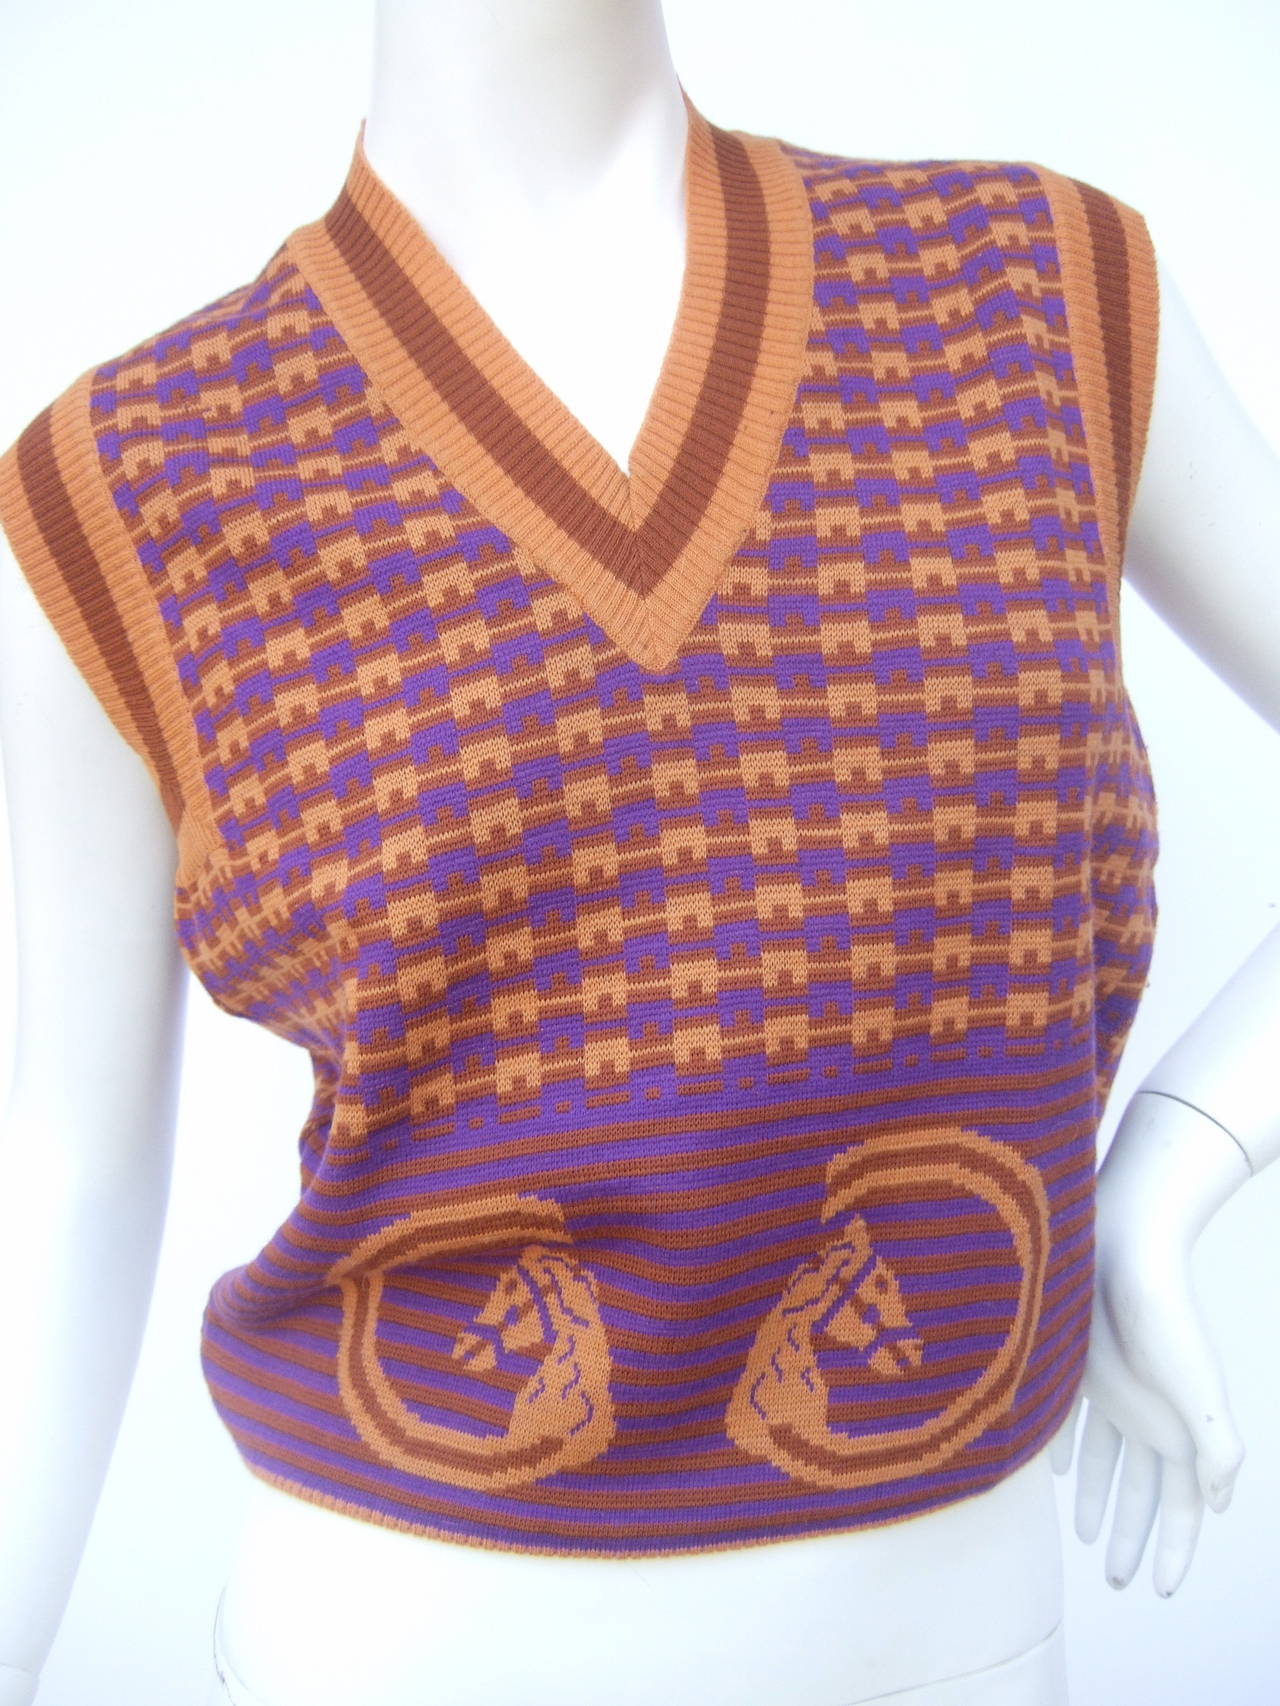 Gucci Italy Equestrian design wool knit sleeveless sweater vest c 1970
The mod retro wool knit sweater is designed with a pair of horse
heads on the front. The horse figures are designed in the shape
of Gucci's G.G. iconic initials 

The